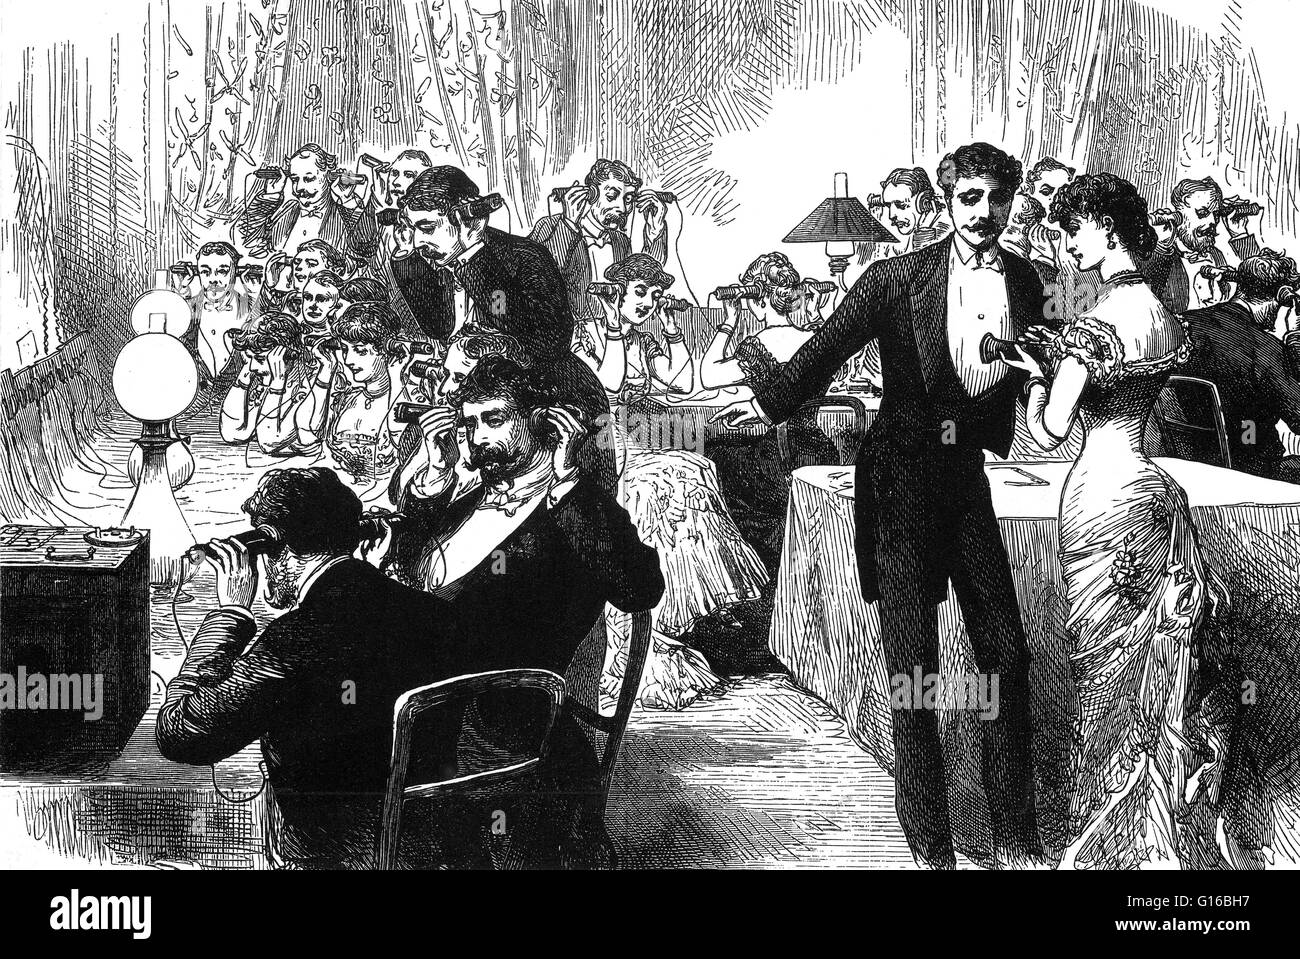 New Year's telephone party, 1882. Illustrating the popularity of Alexander Graham Bell's invention, patented in 1876. The novelty of the invention proved very popular, especially at parties. Listeners with 'hearing tubes' could all hearing the same messag Stock Photo